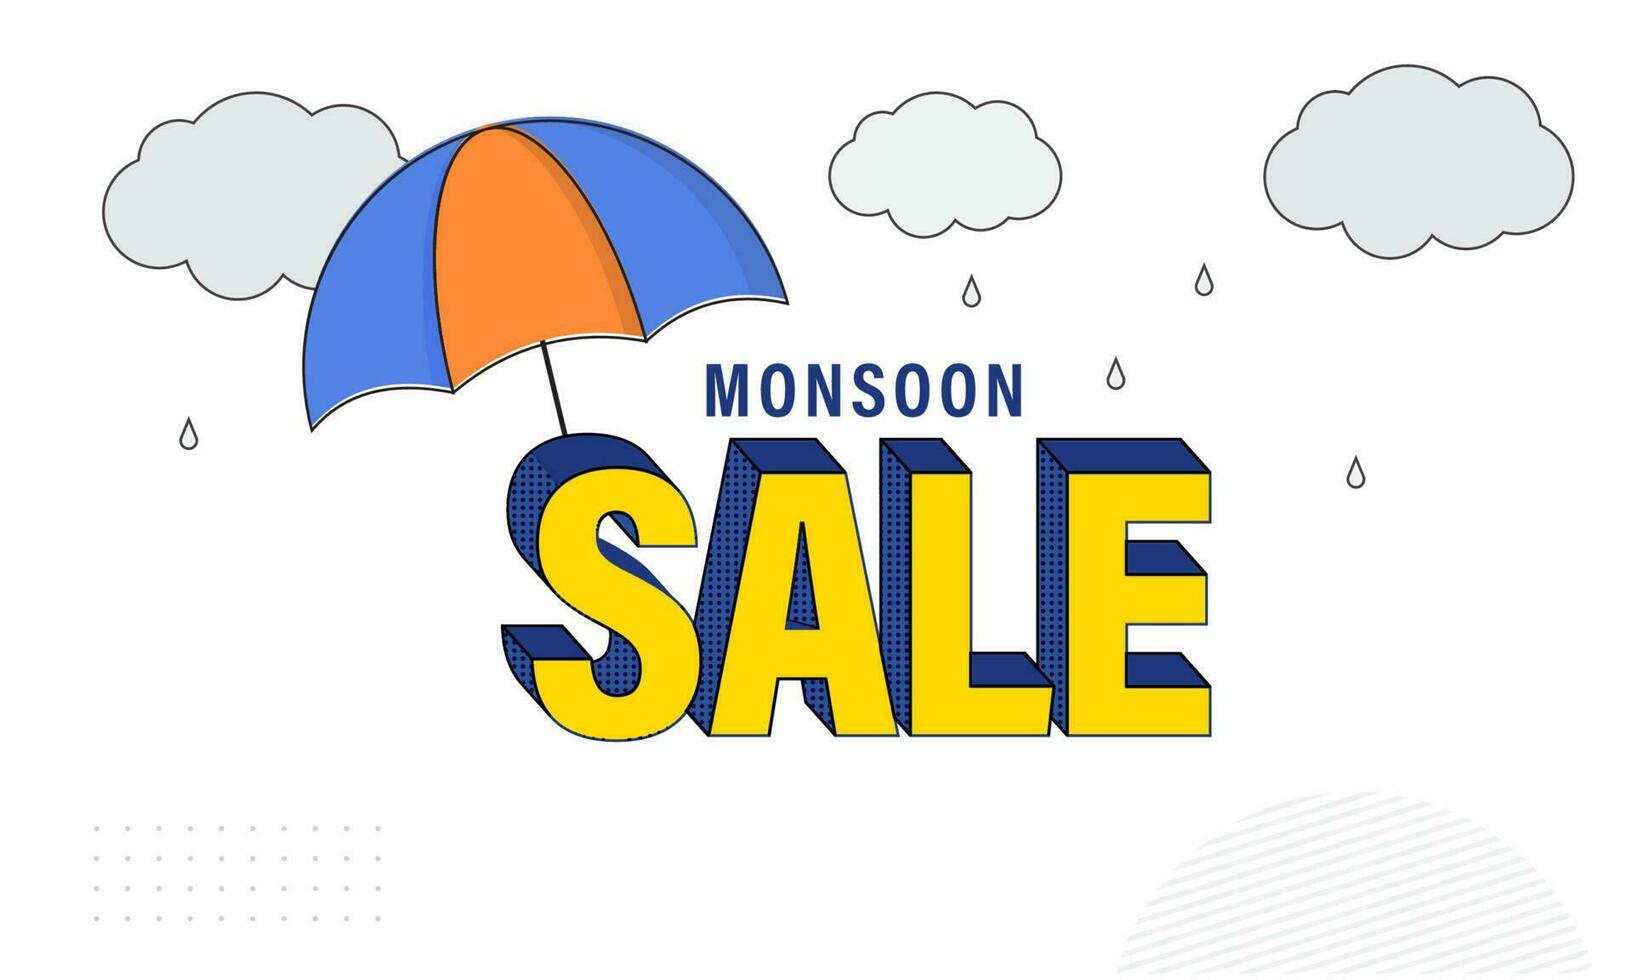 Monsoon Sale Banner Design With Umbrella And Rainy Clouds On White Background. vector